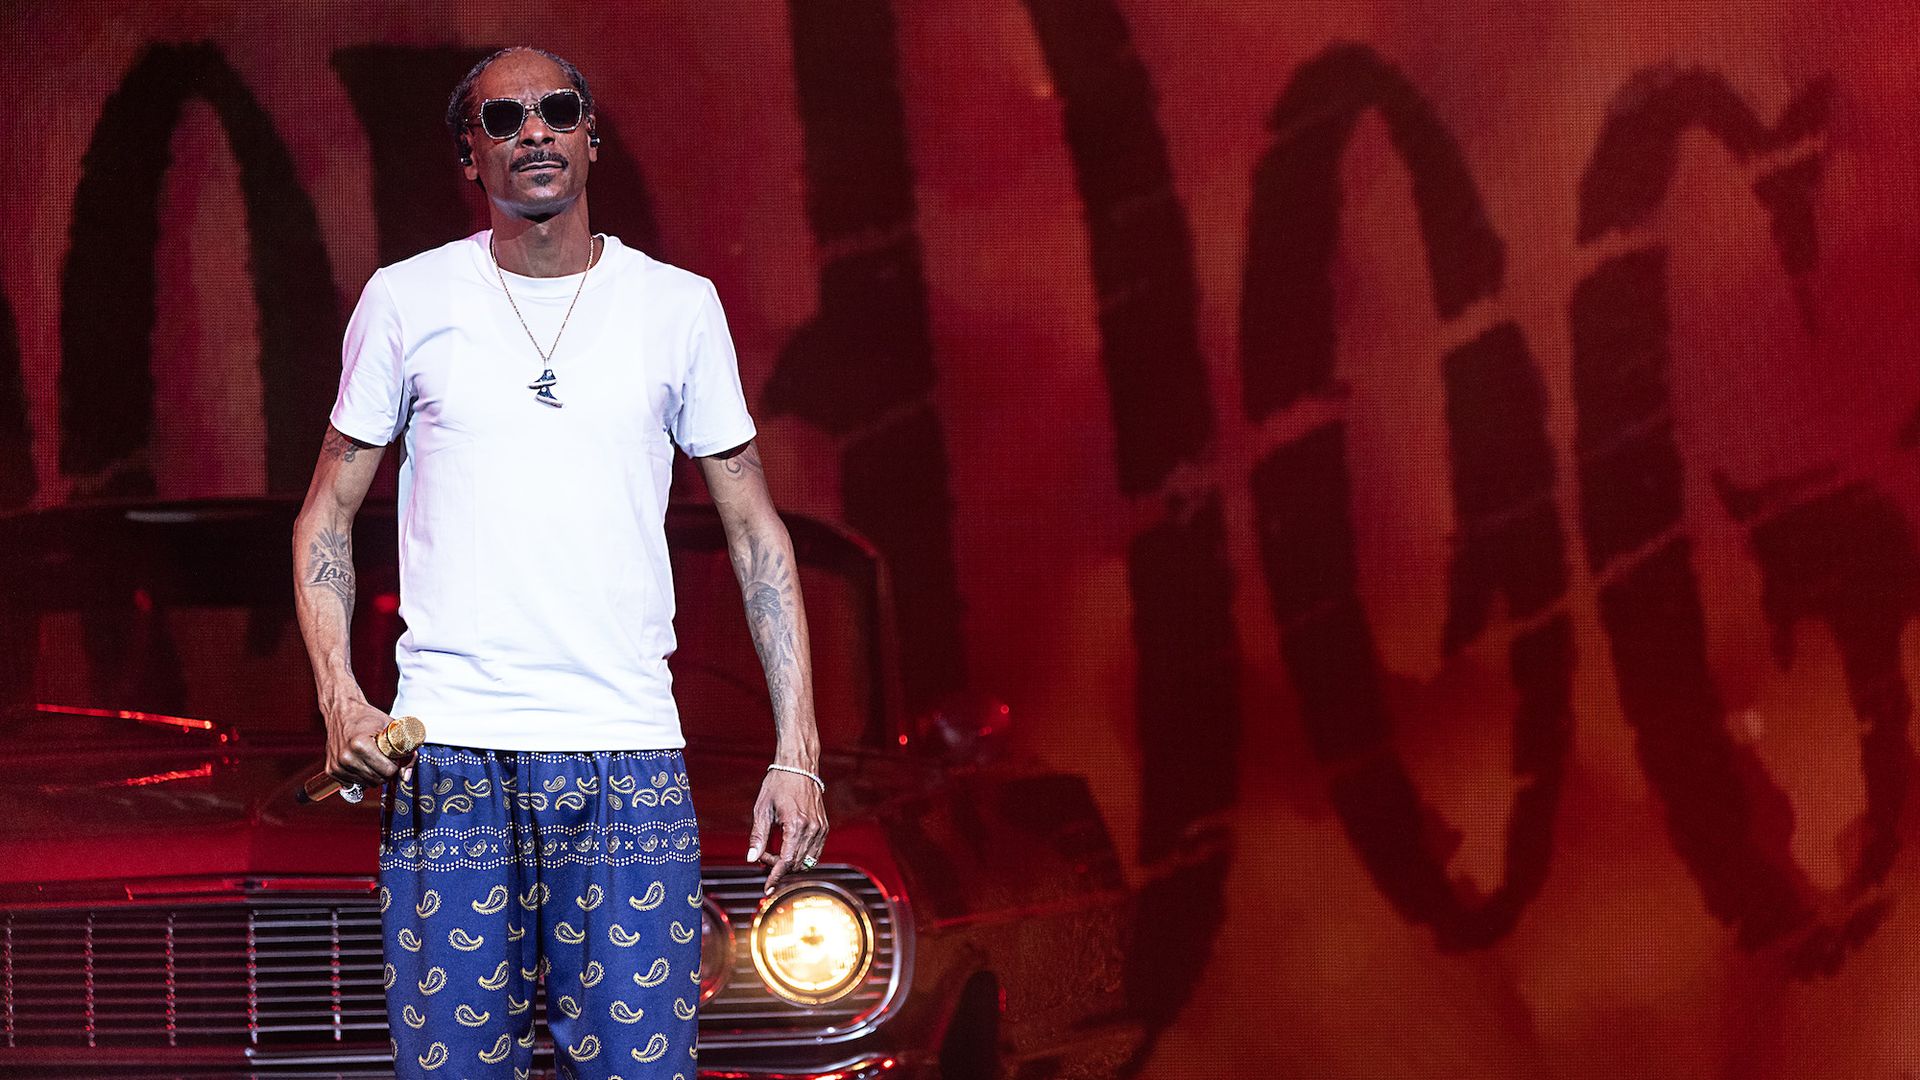 Snoop Dogg performs at PNC Music Pavilion on Aug. 8 in Charlotte, North Carolina.